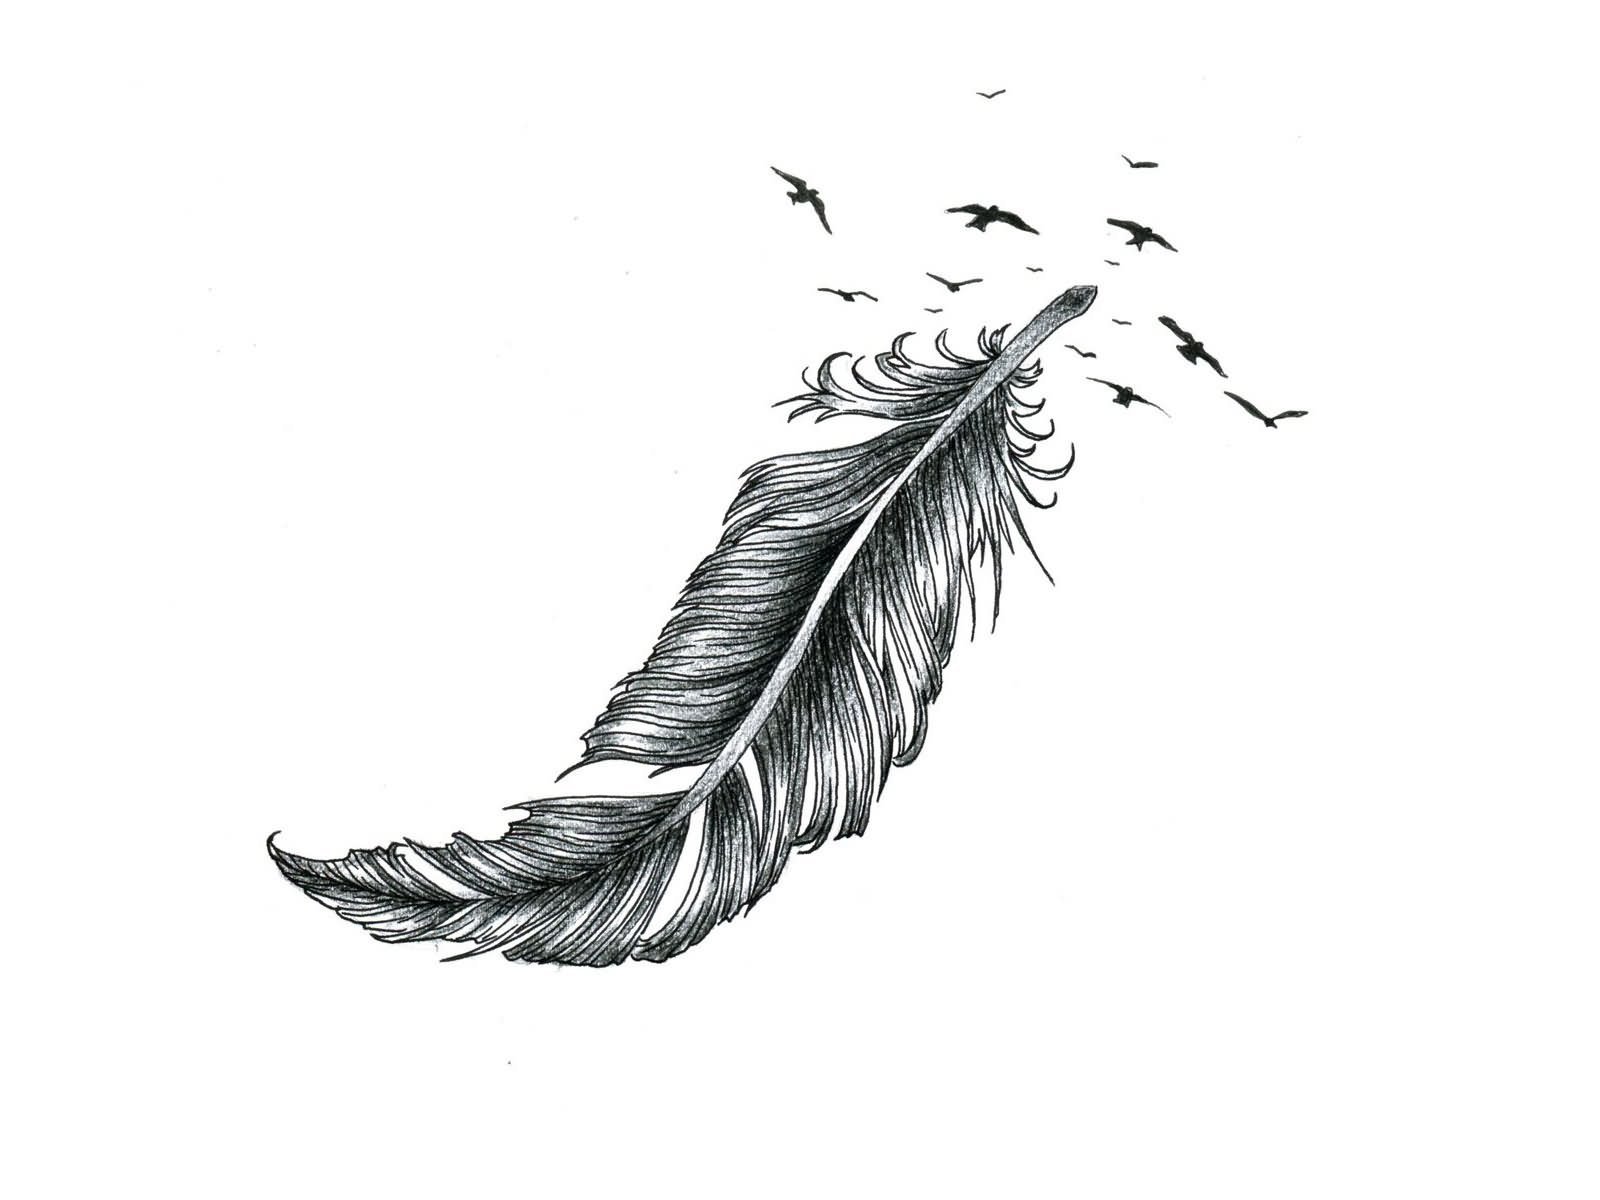 Bird feather drawing by one continuous line posters for the wall • posters  plume, white, drawn | myloview.com